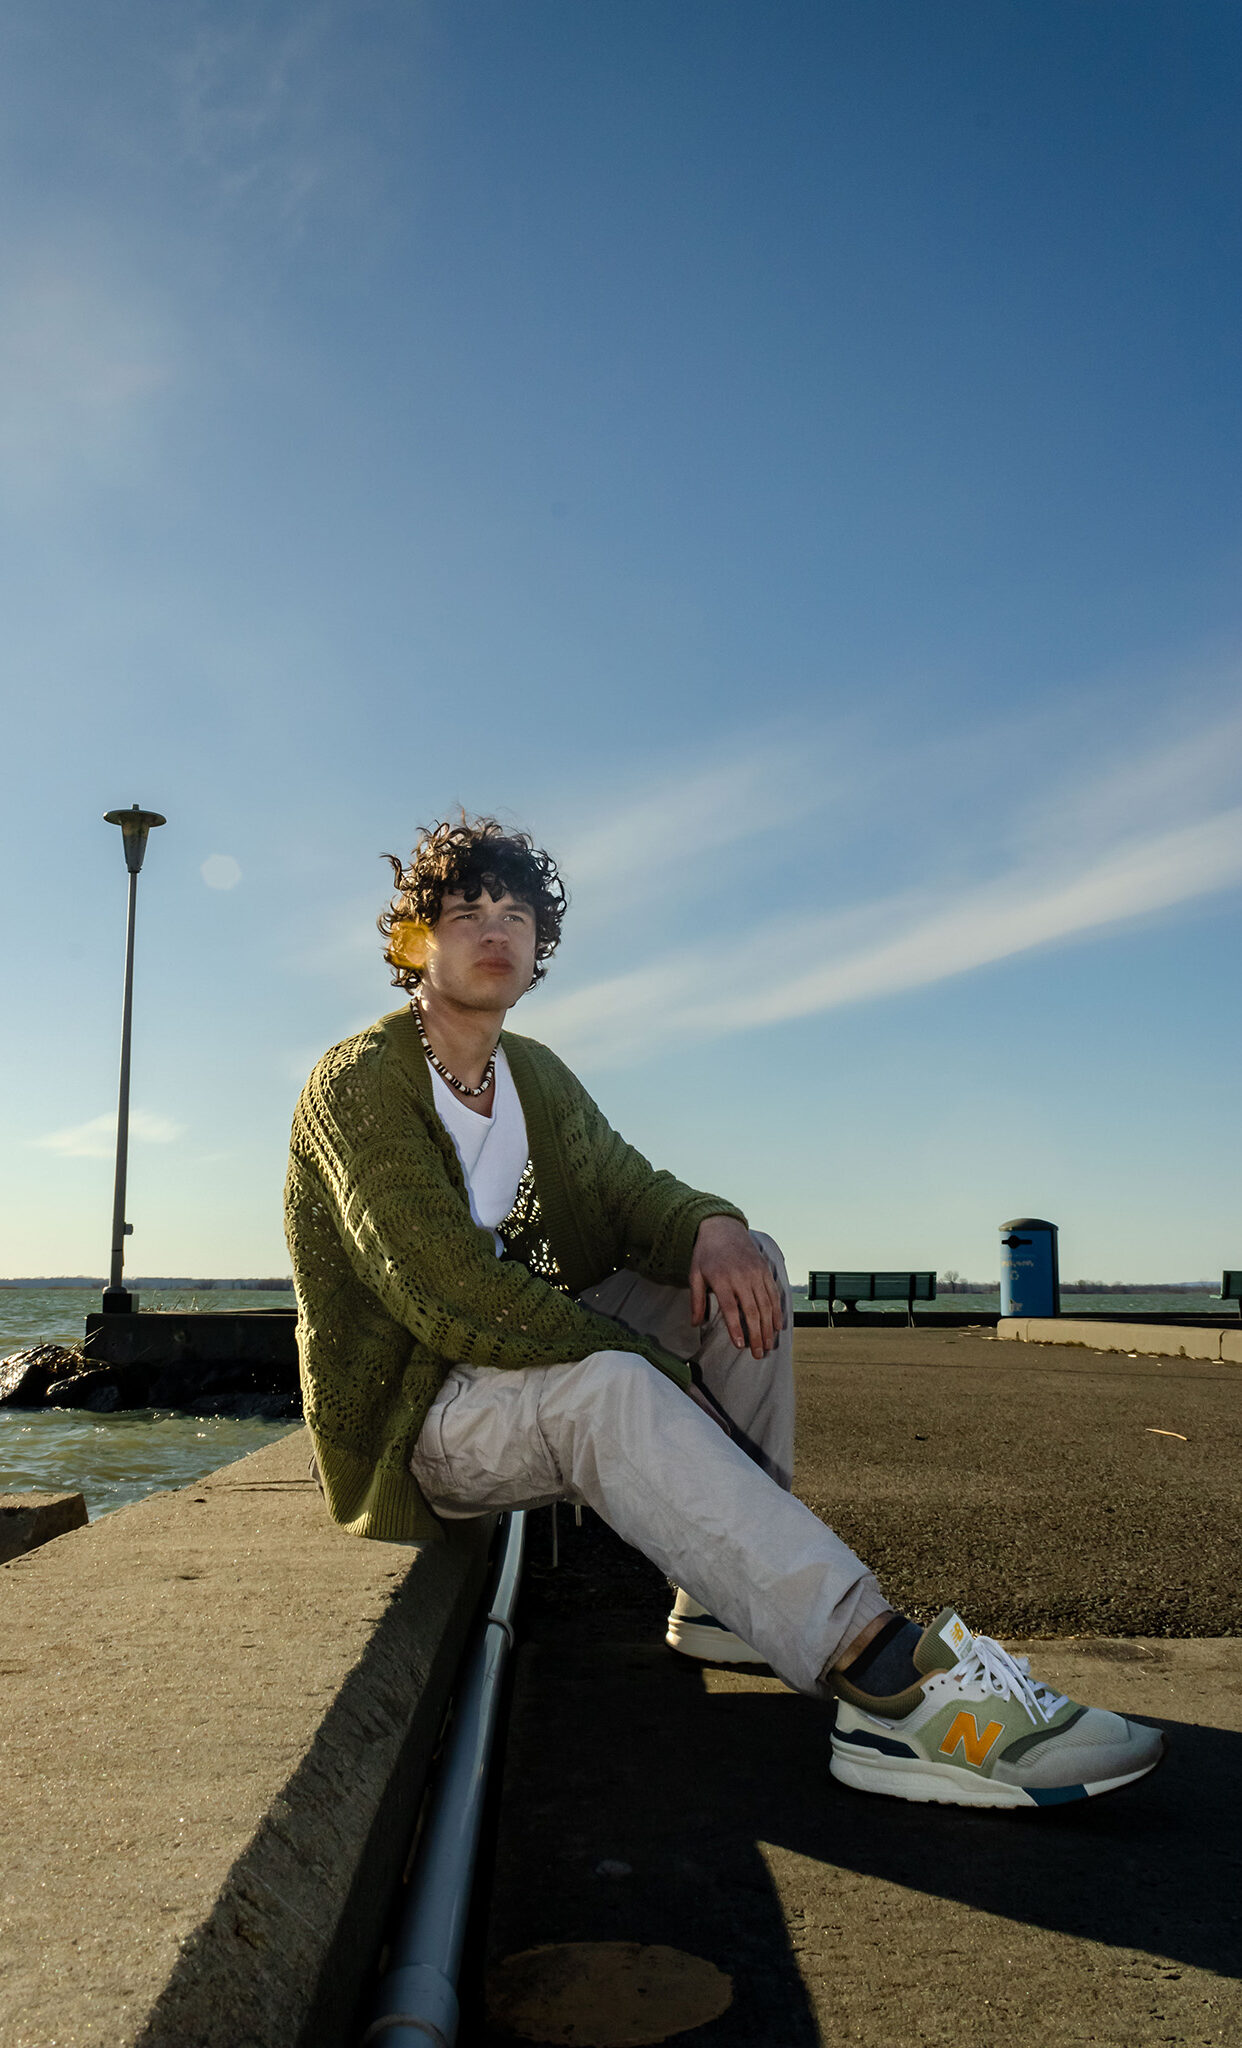 A teen boy with curl hair in a green cardigan sits at a peer on a sunny day.